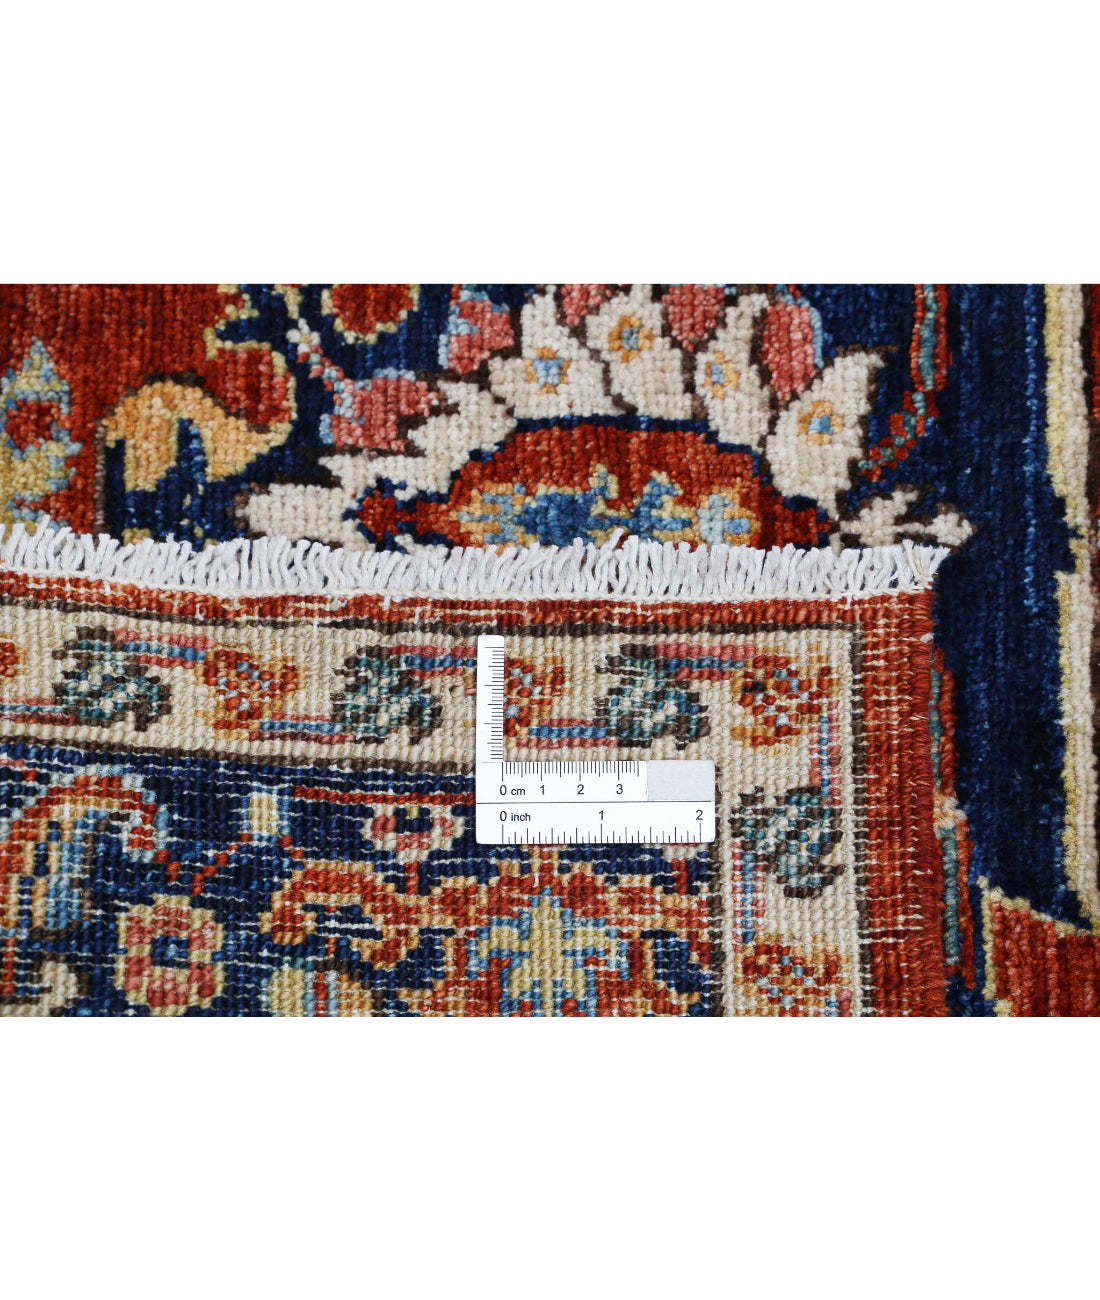 Hand Knotted Nomadic Caucasian Humna Wool Rug - 3'2'' x 4'10'' 3'2'' x 4'10'' (95 X 145) / Rust / Blue